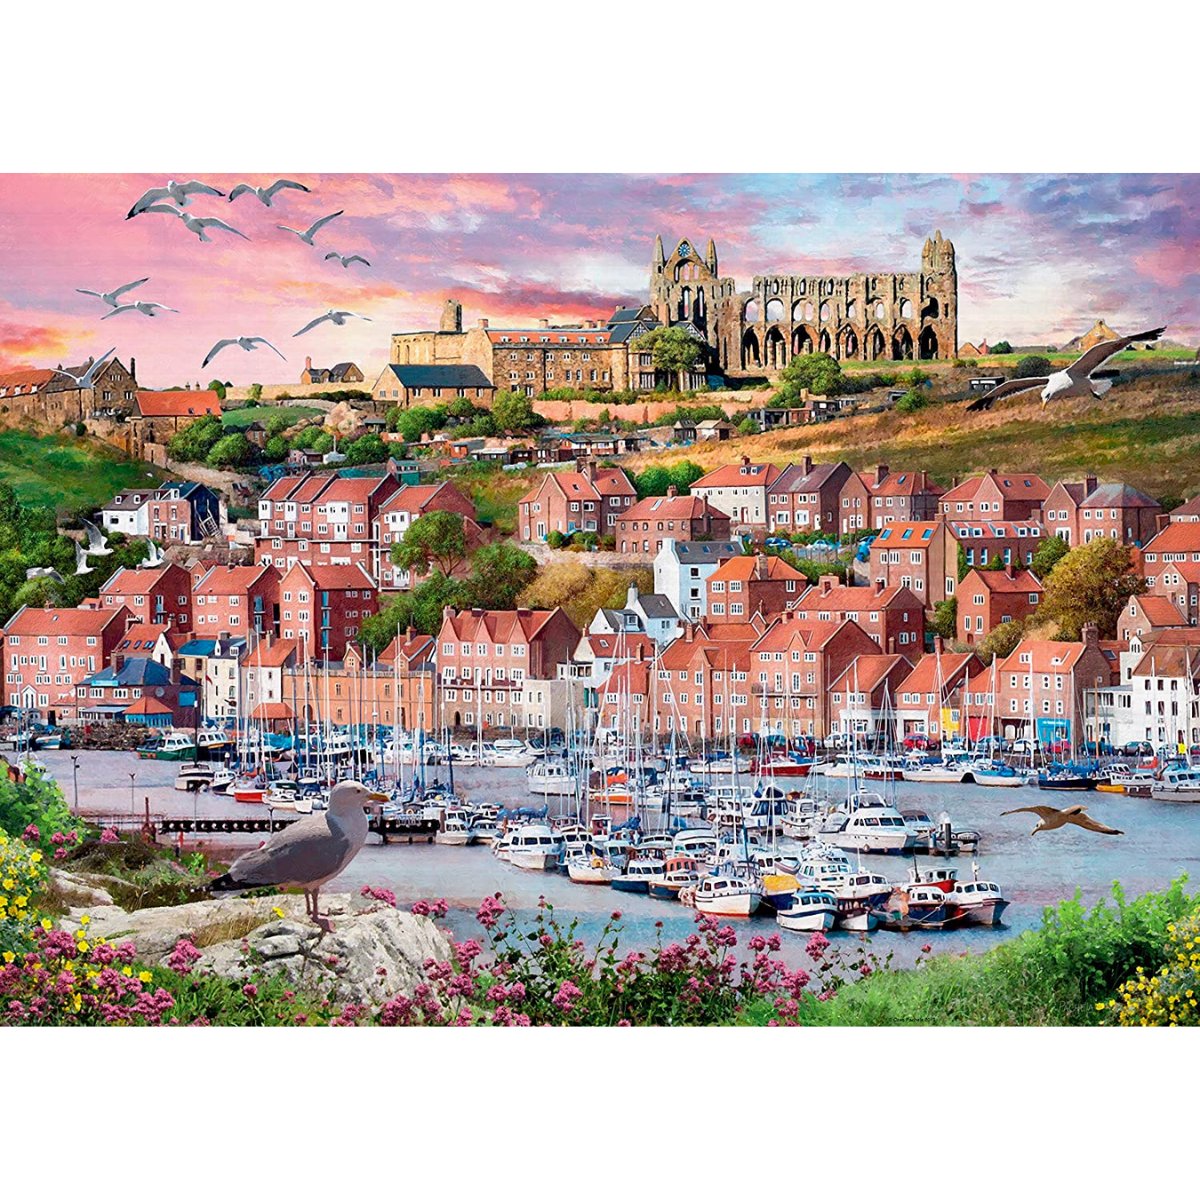 Ravensburger Whitby Sunset Jigsaw Puzzle (1000 Pieces) - Phillips Hobbies